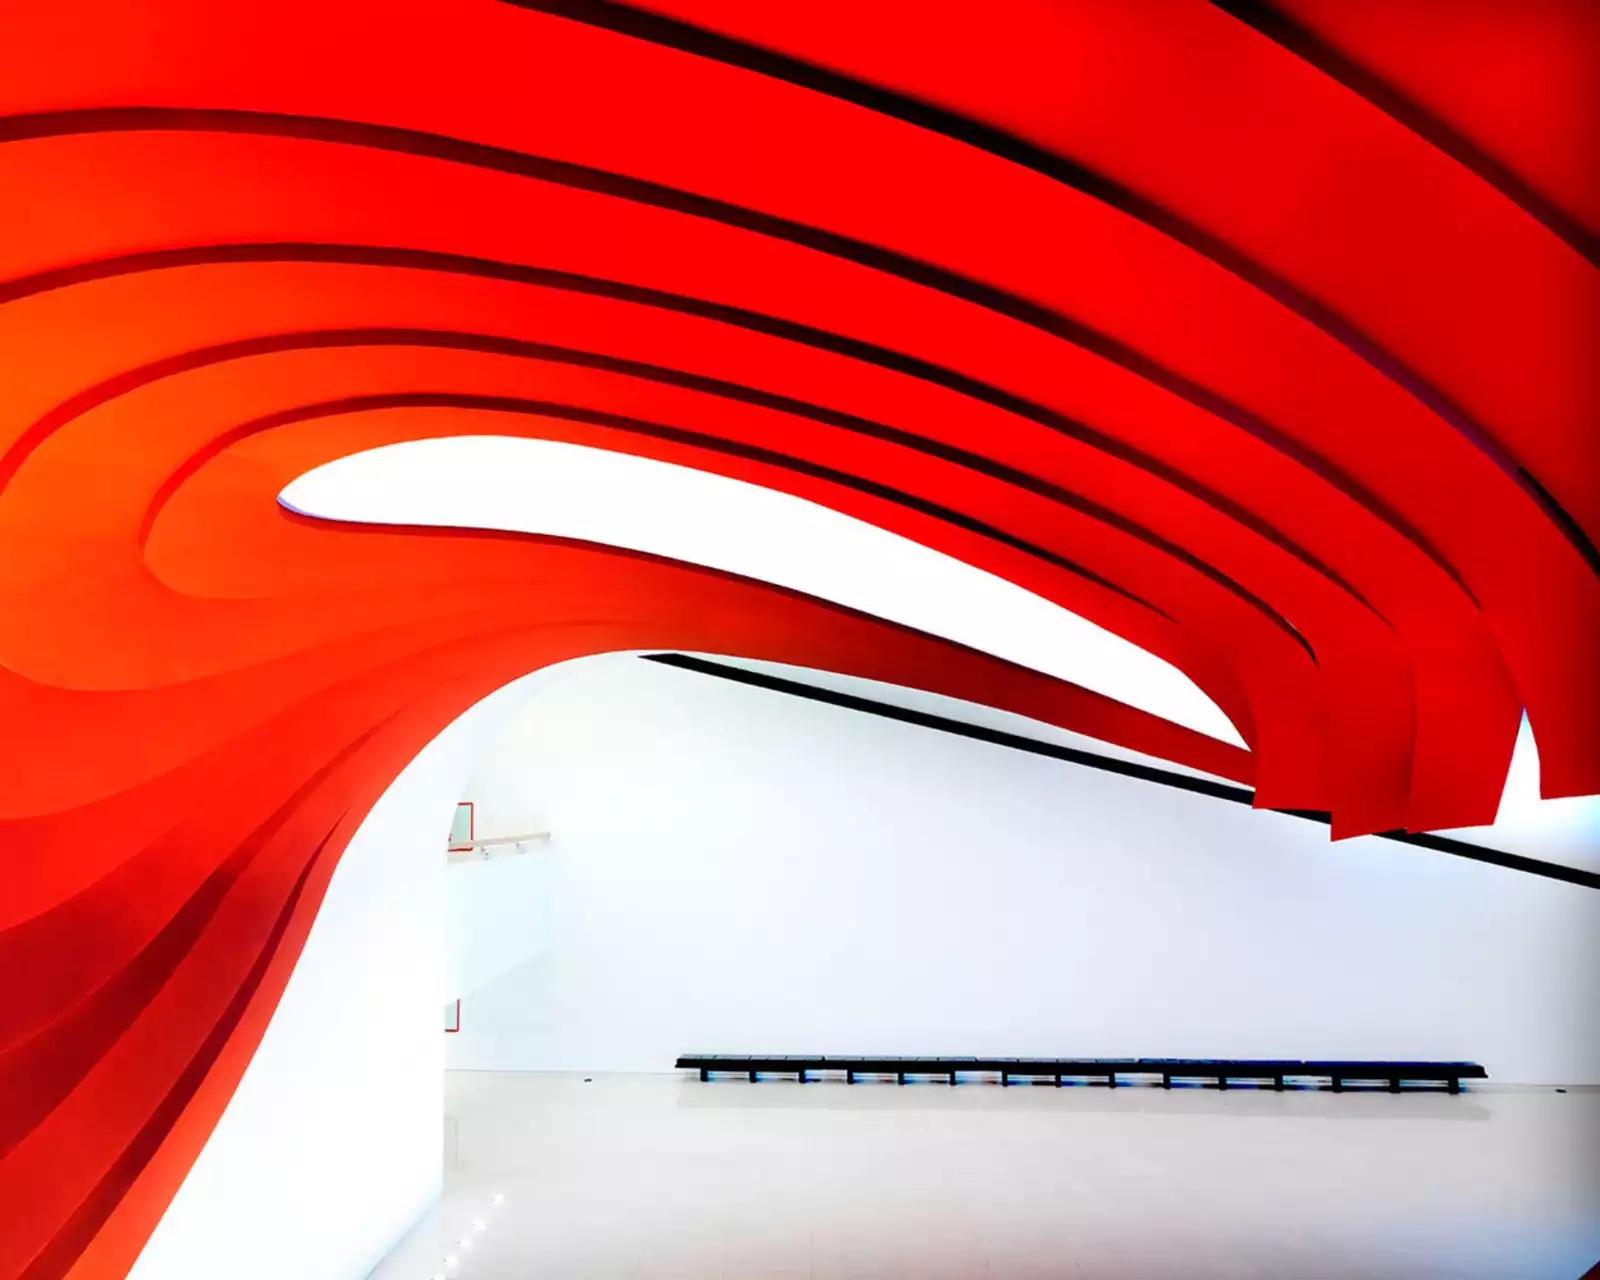 Auditorium Oscar Niemeyer II, Sao Paulo, Brazil
2012
Chromogenic print
120 x 150 cm
Edition of 5

Italian, b. 1954, Florence, Italy, based in Florence, Italy

Massimo Listri travels his native Italy and the world with his camera, photographing grand